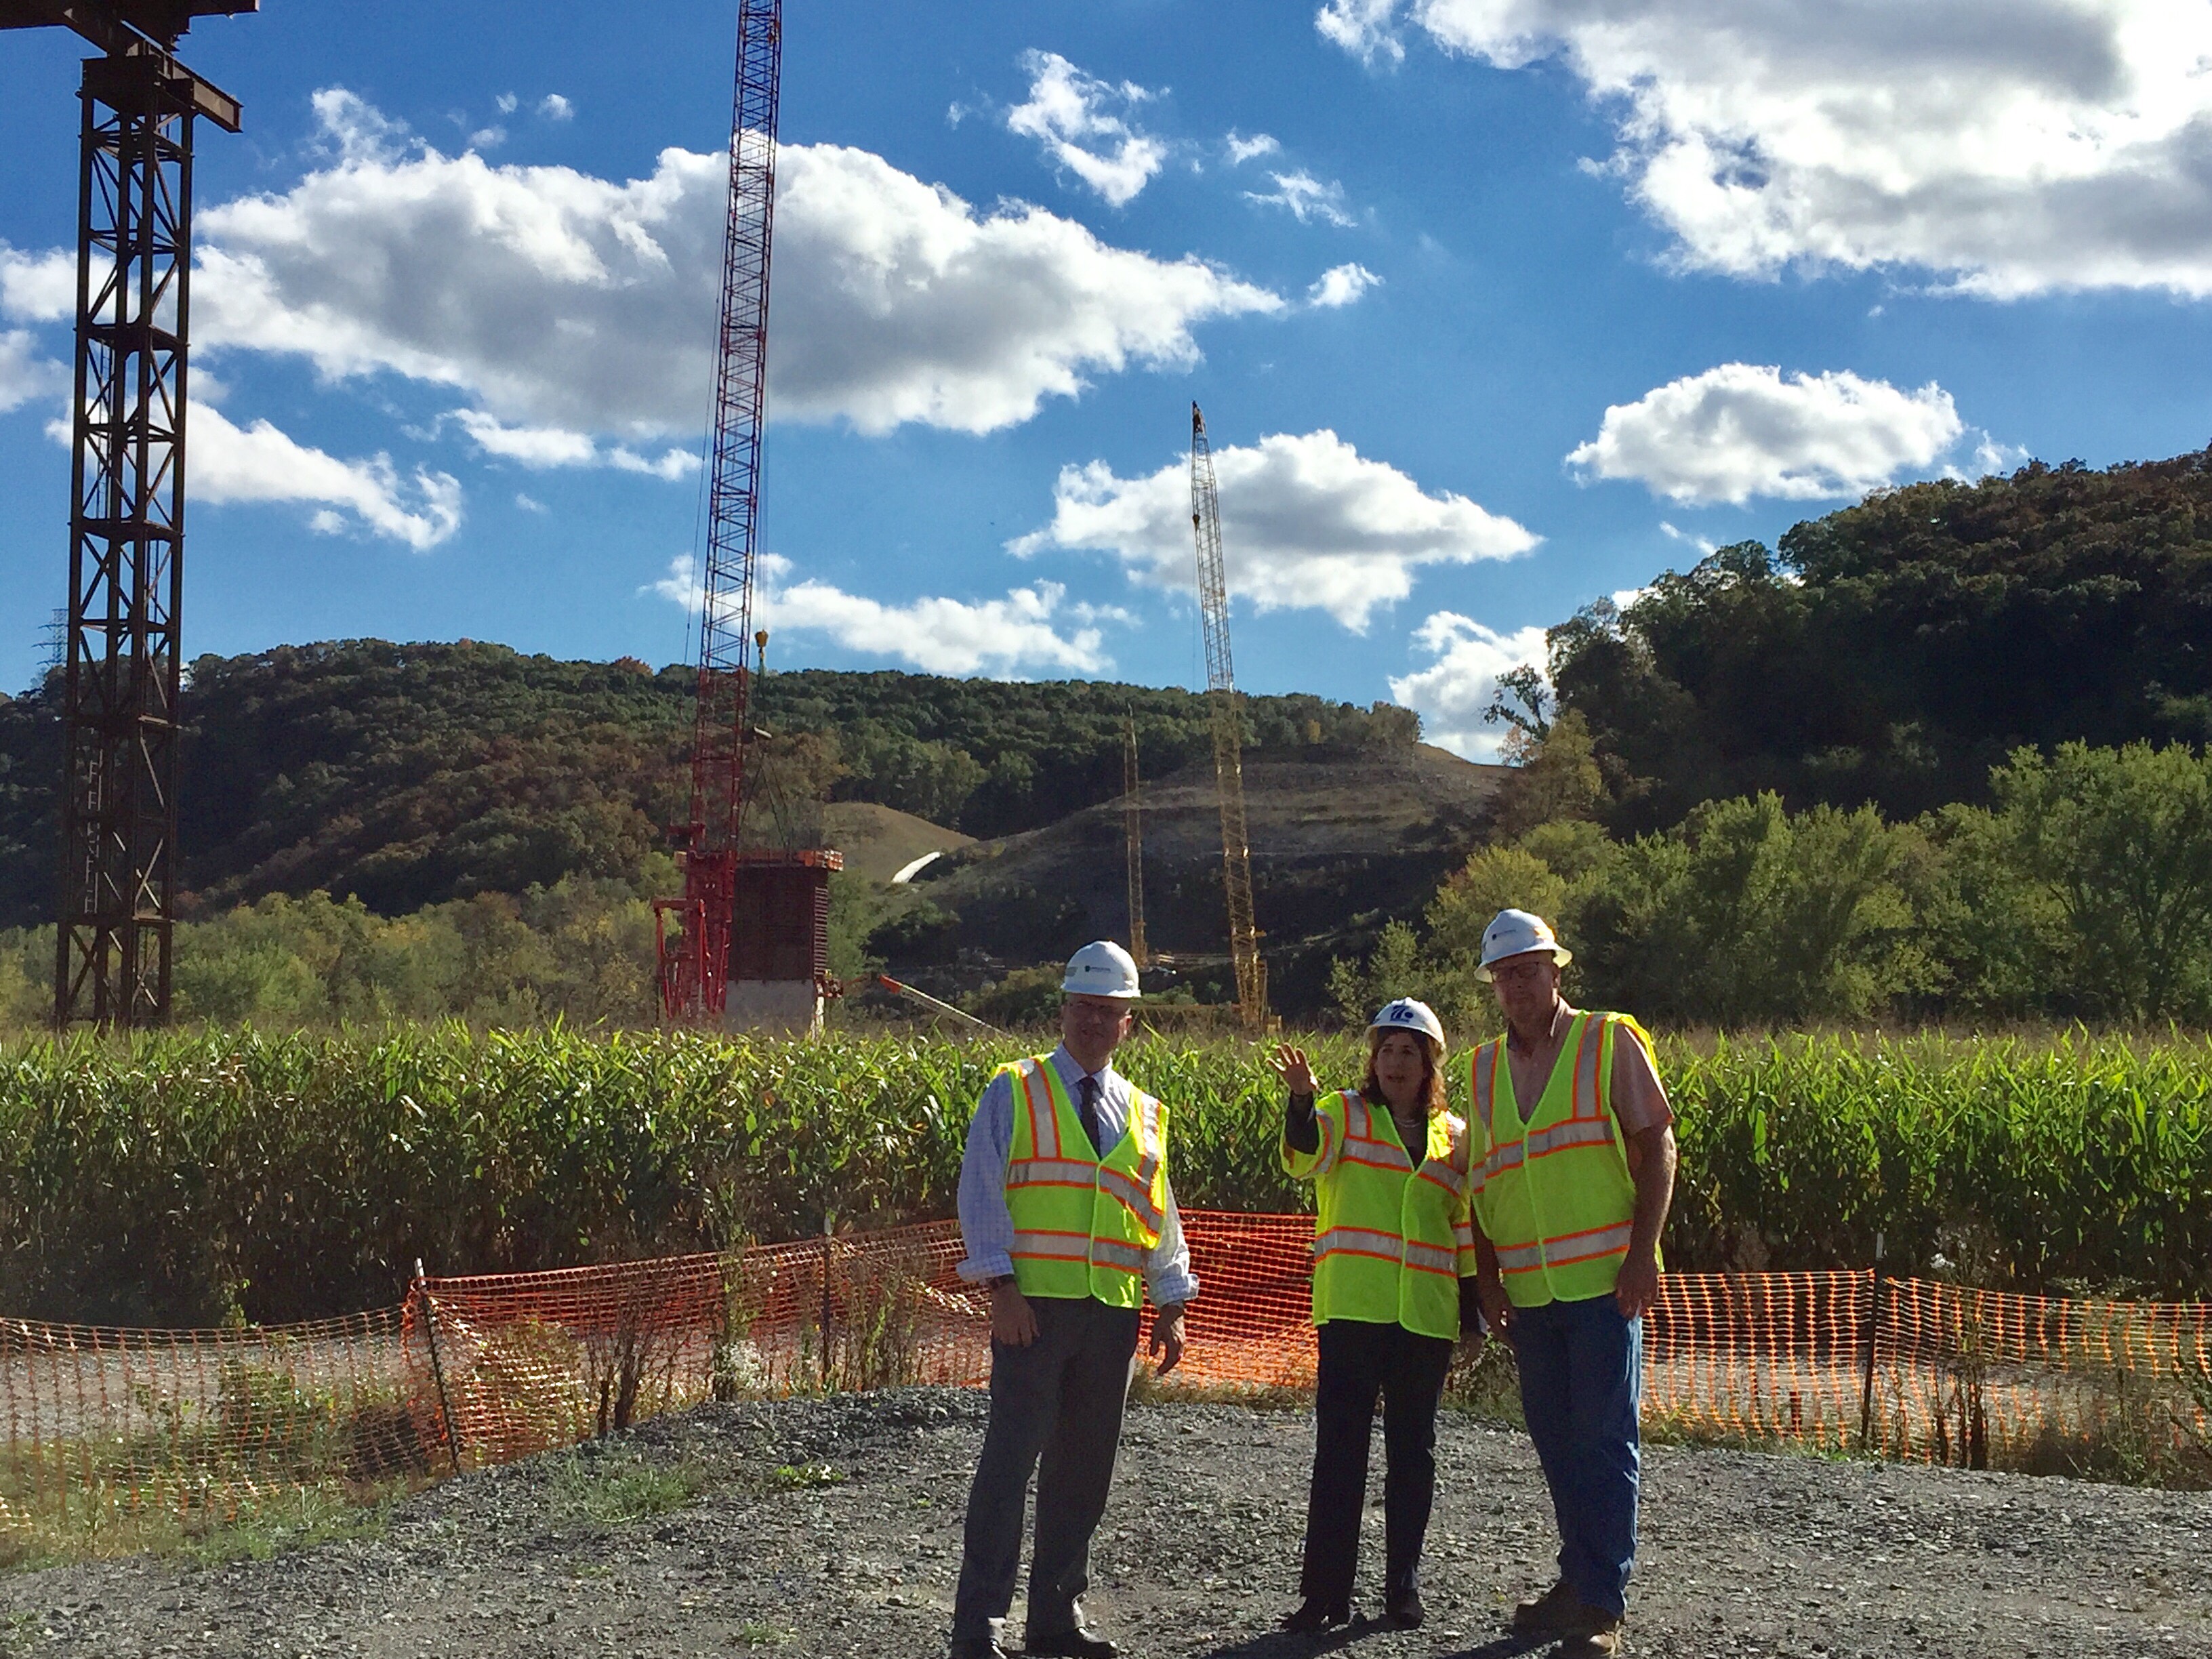 Secretary Leslie S. Richards at the Central Susquehanna Valley Transportation project construction site